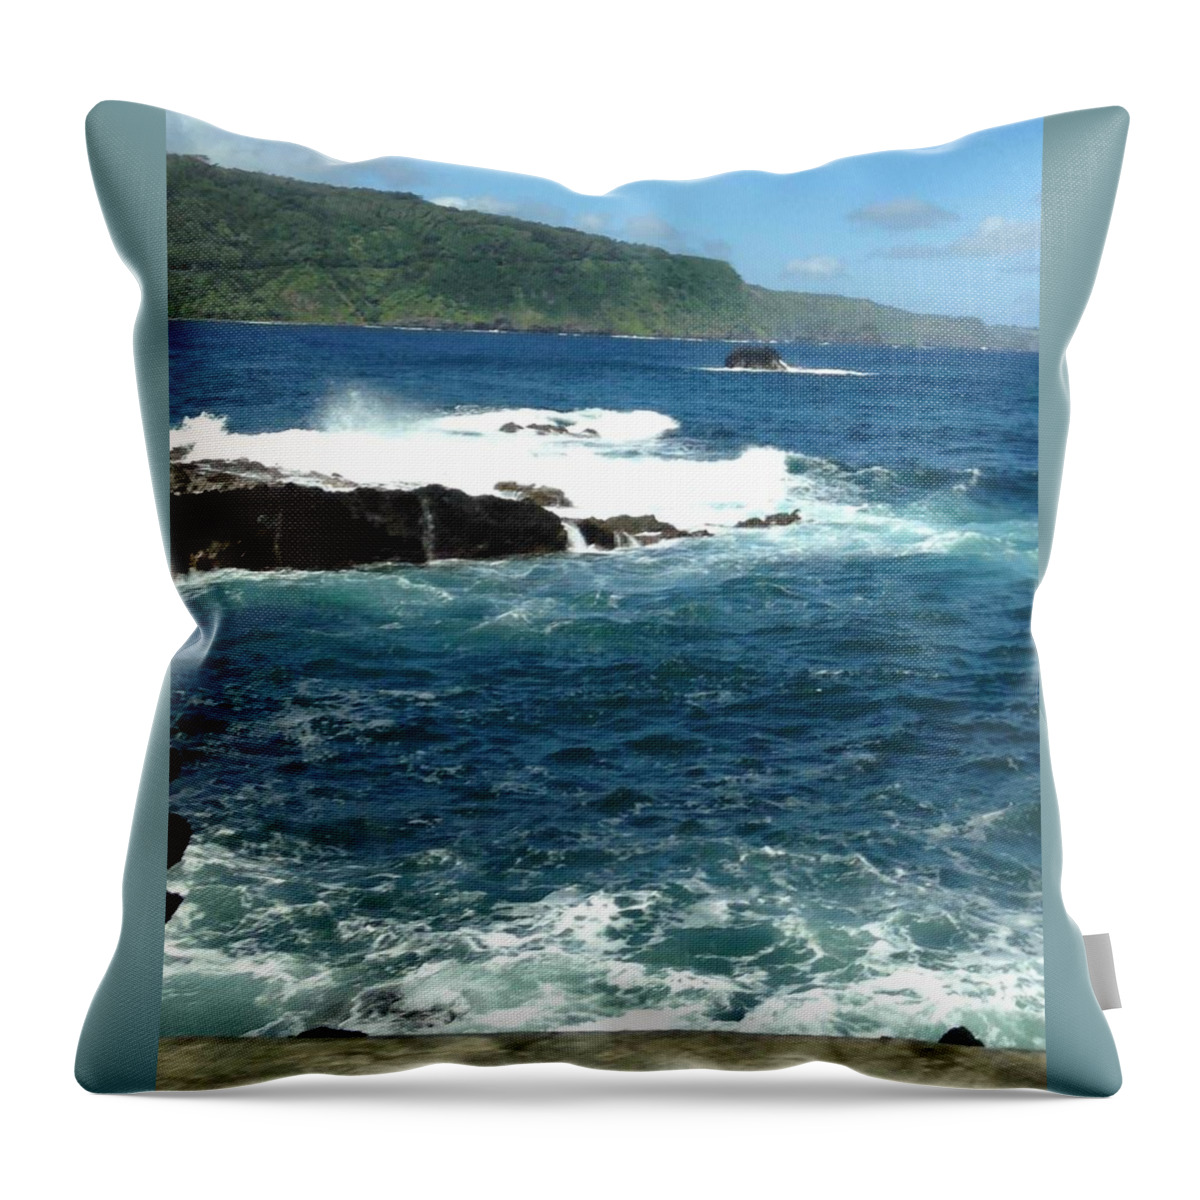  Throw Pillow featuring the painting Lisloffinna by Trevor A Smith